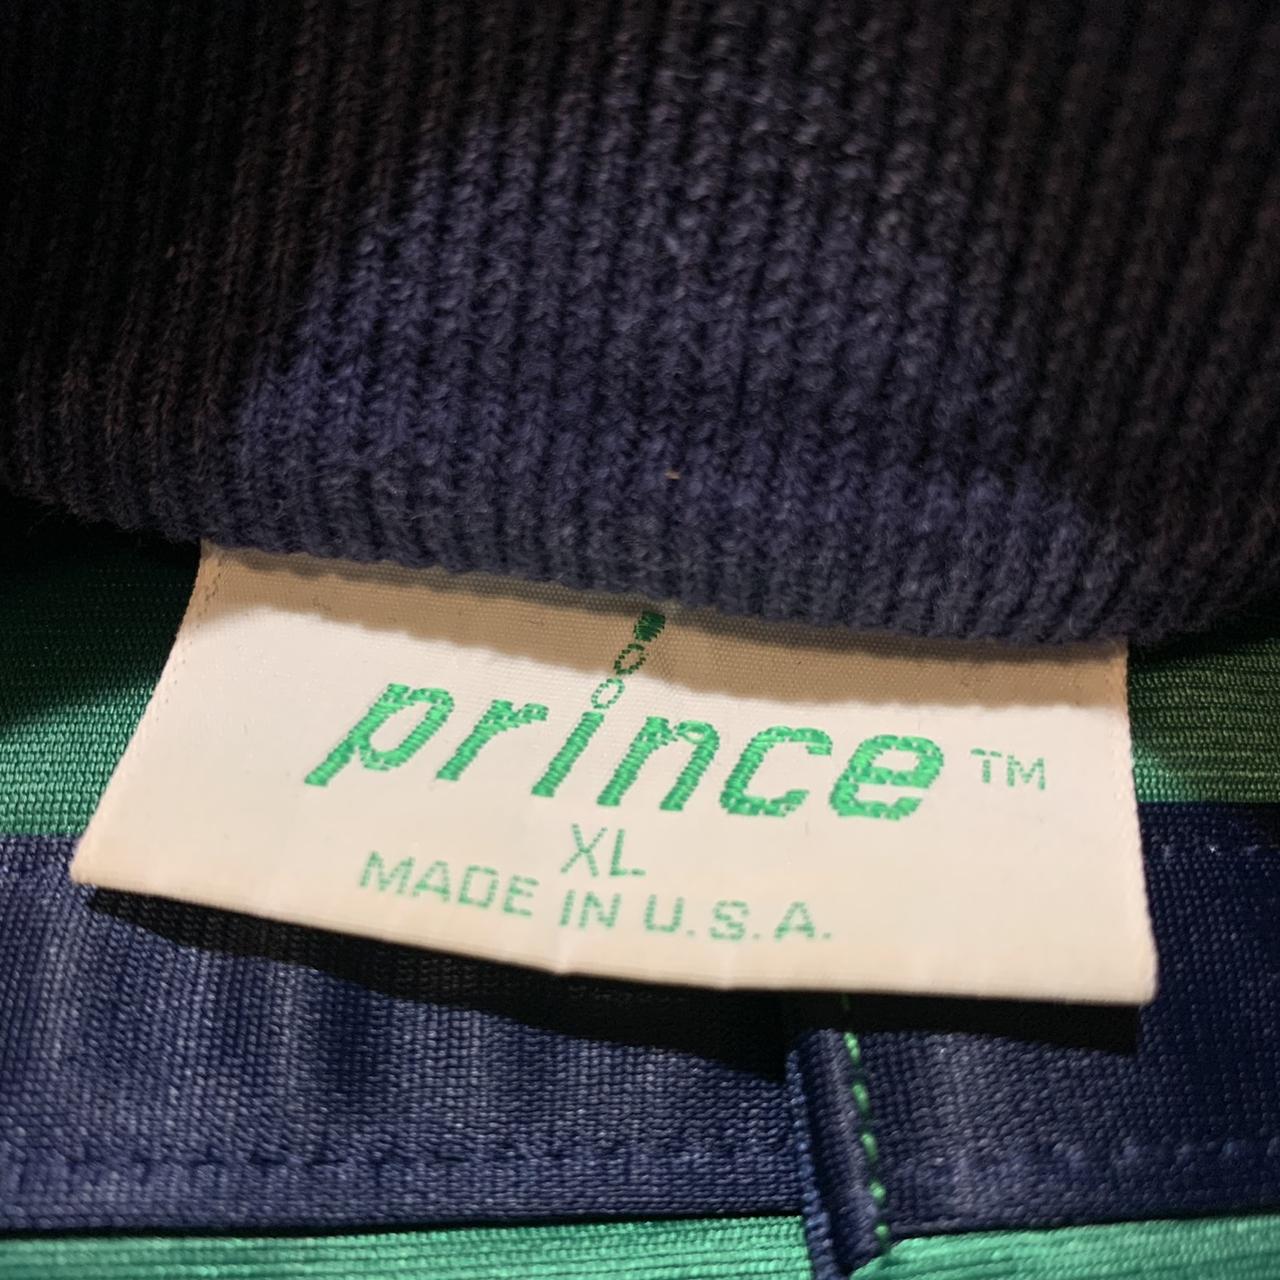 Prince Men's Blue and Green Jacket (4)